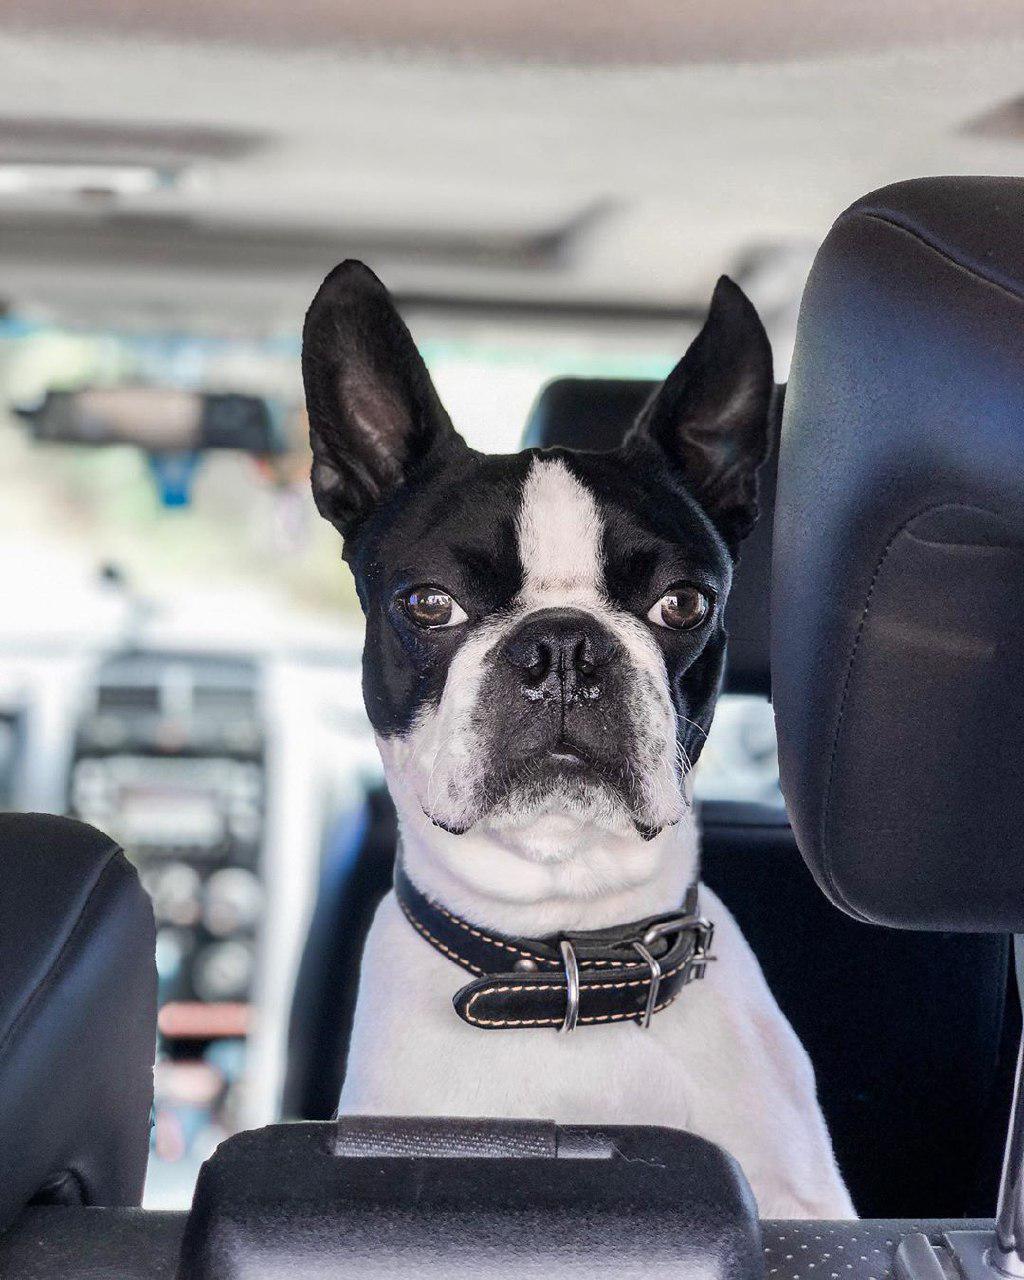 A Boston Terrier staring while sitting in the back seat inside the car